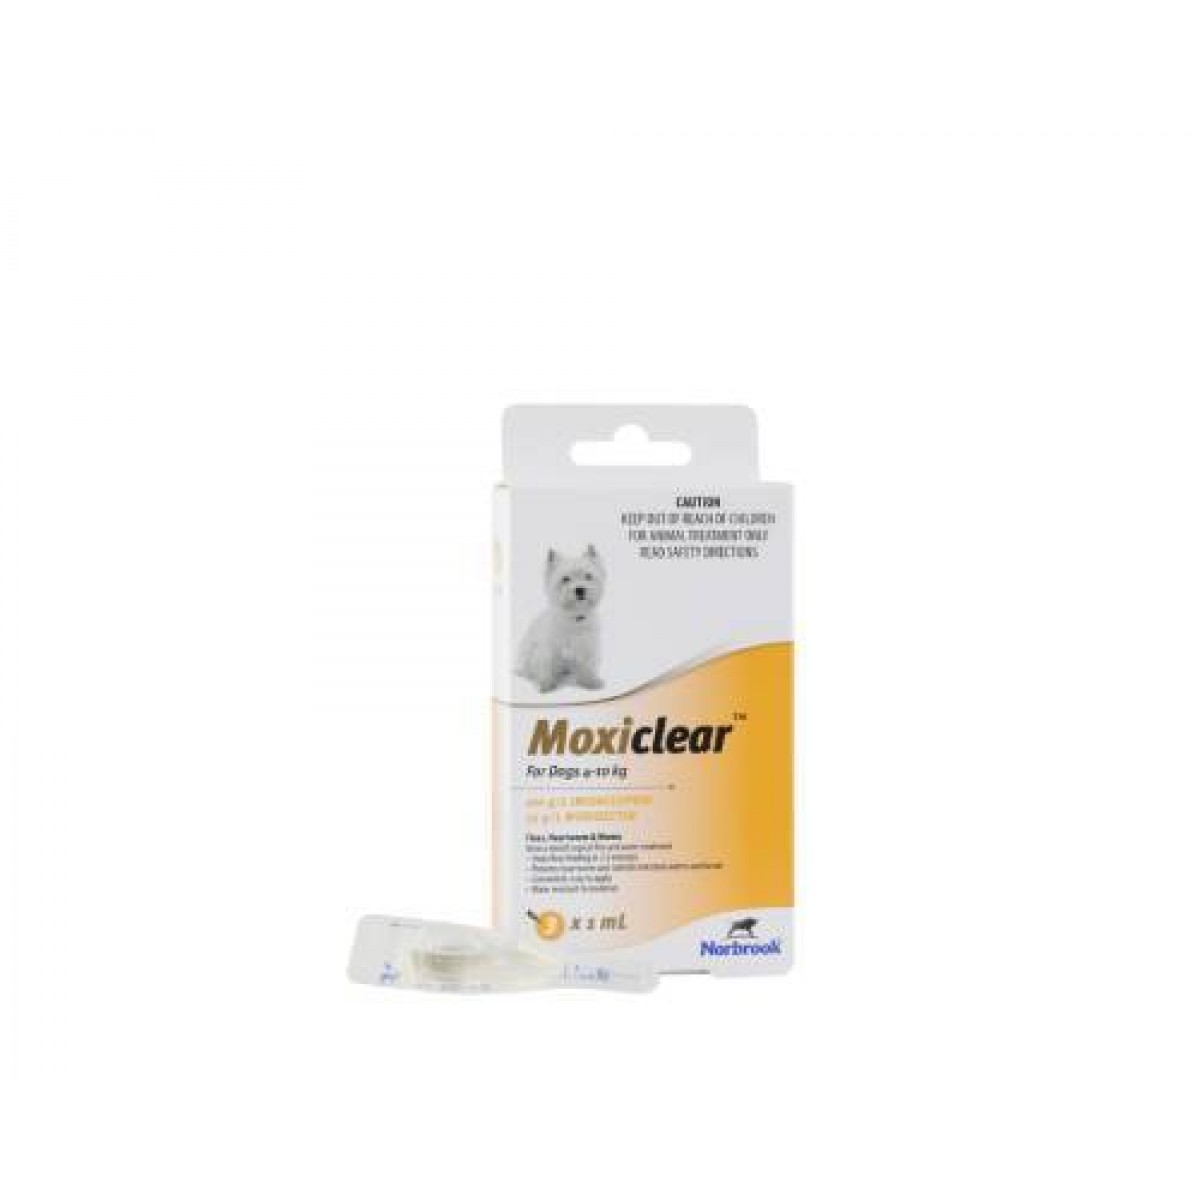 Moxiclear Dog M 4-10kg 3 pipete antiparazitare, Antiparazitare externe, Antiparazitare, Câini 